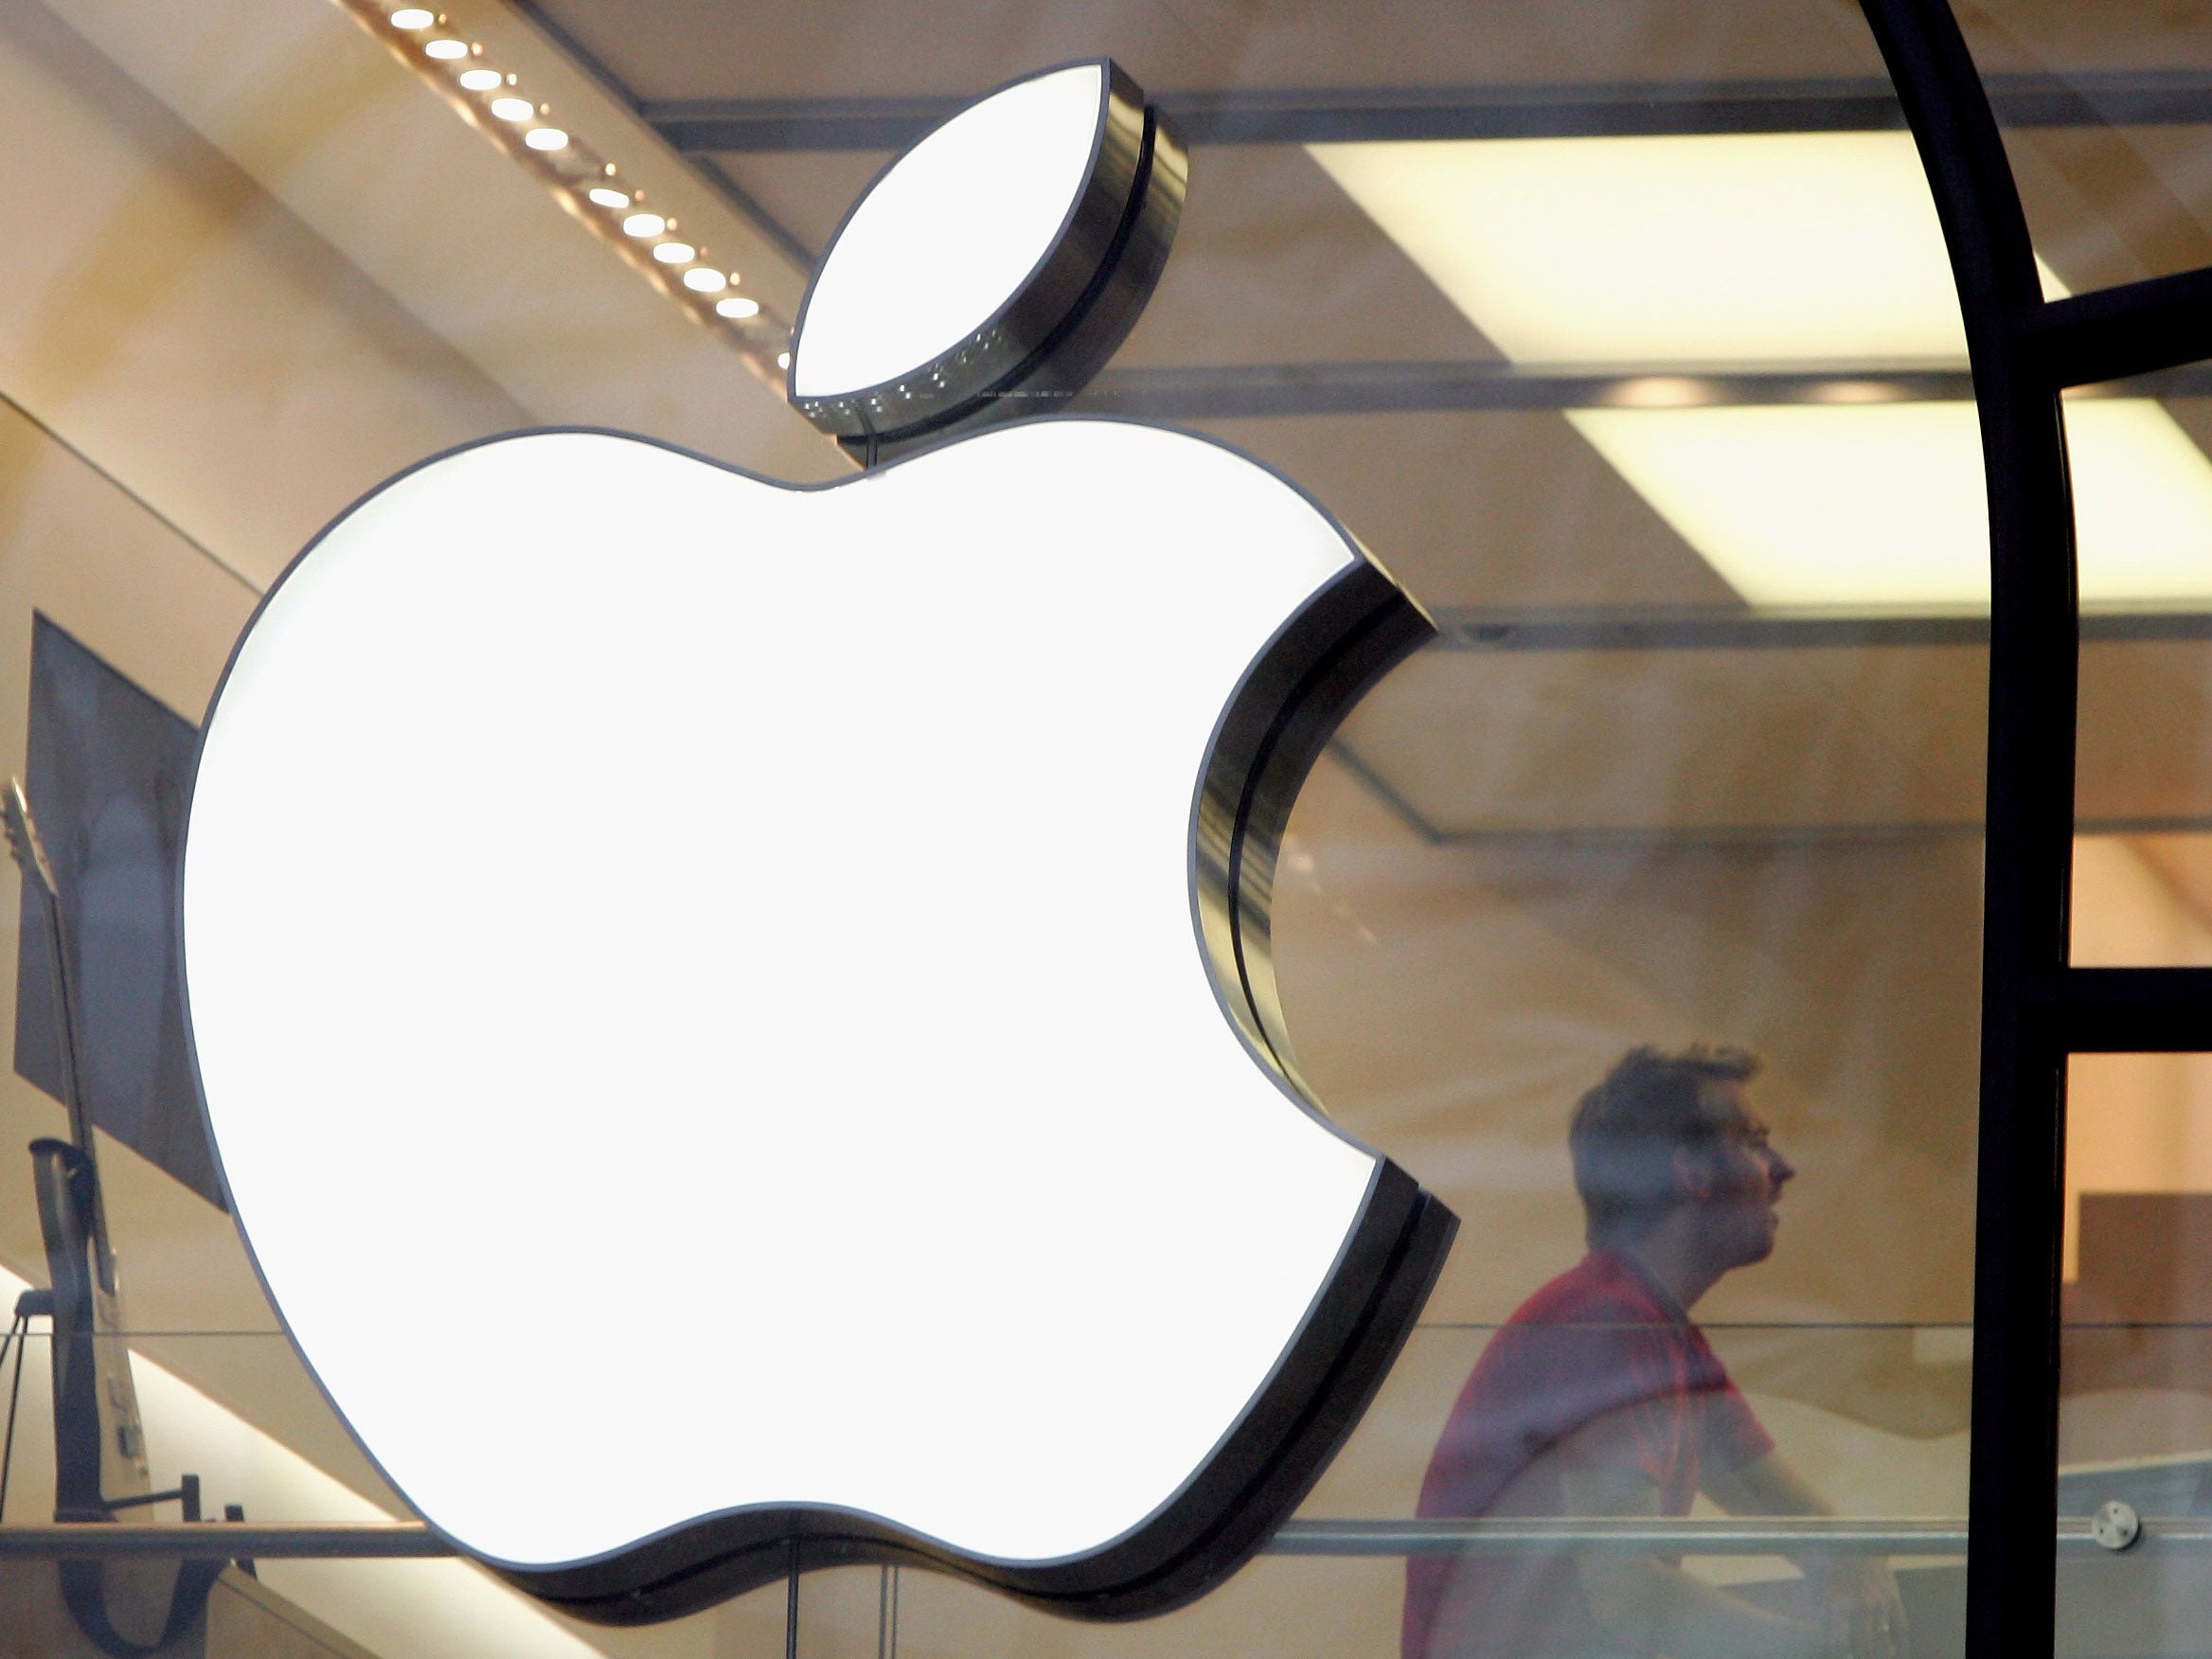 Imagination was warned it will make a loss this year due to Apple’s slowing smartphone sales